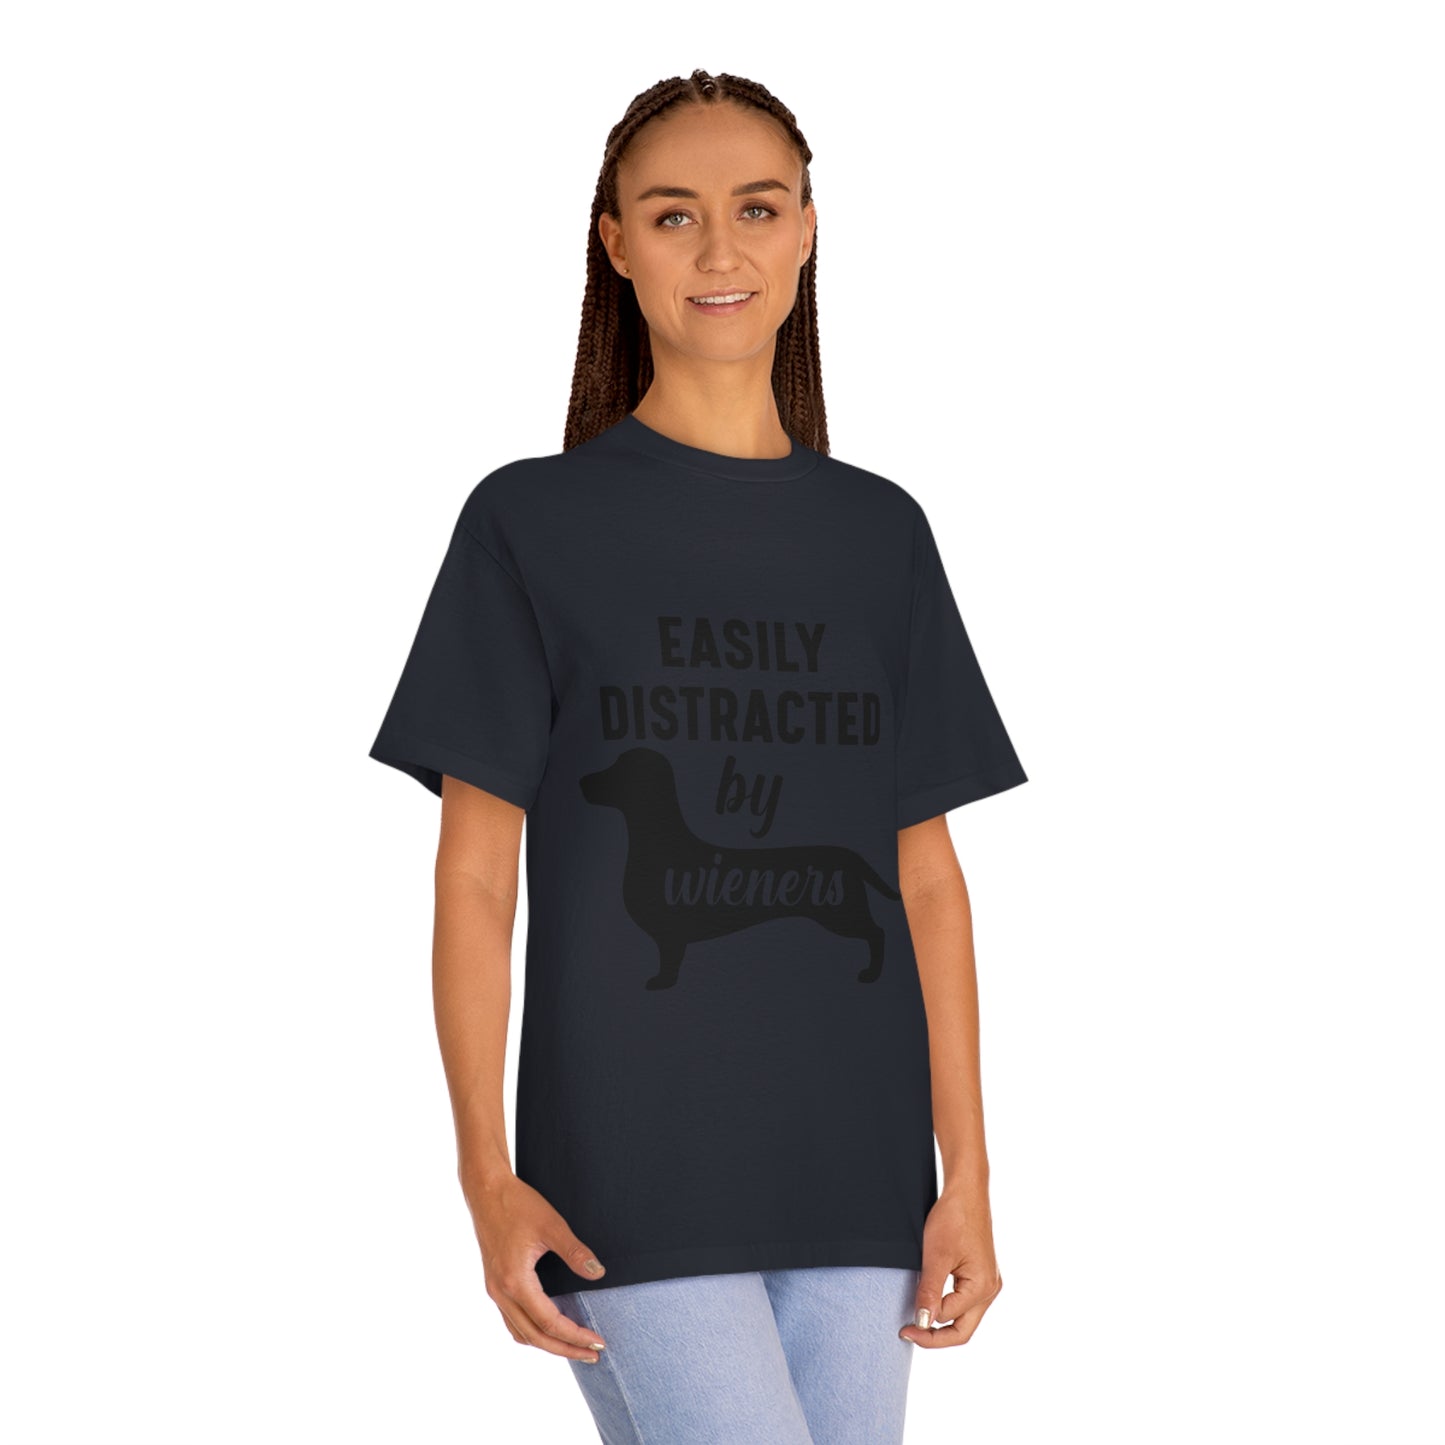 Easily distracted by wieners Unisex Classic Tee